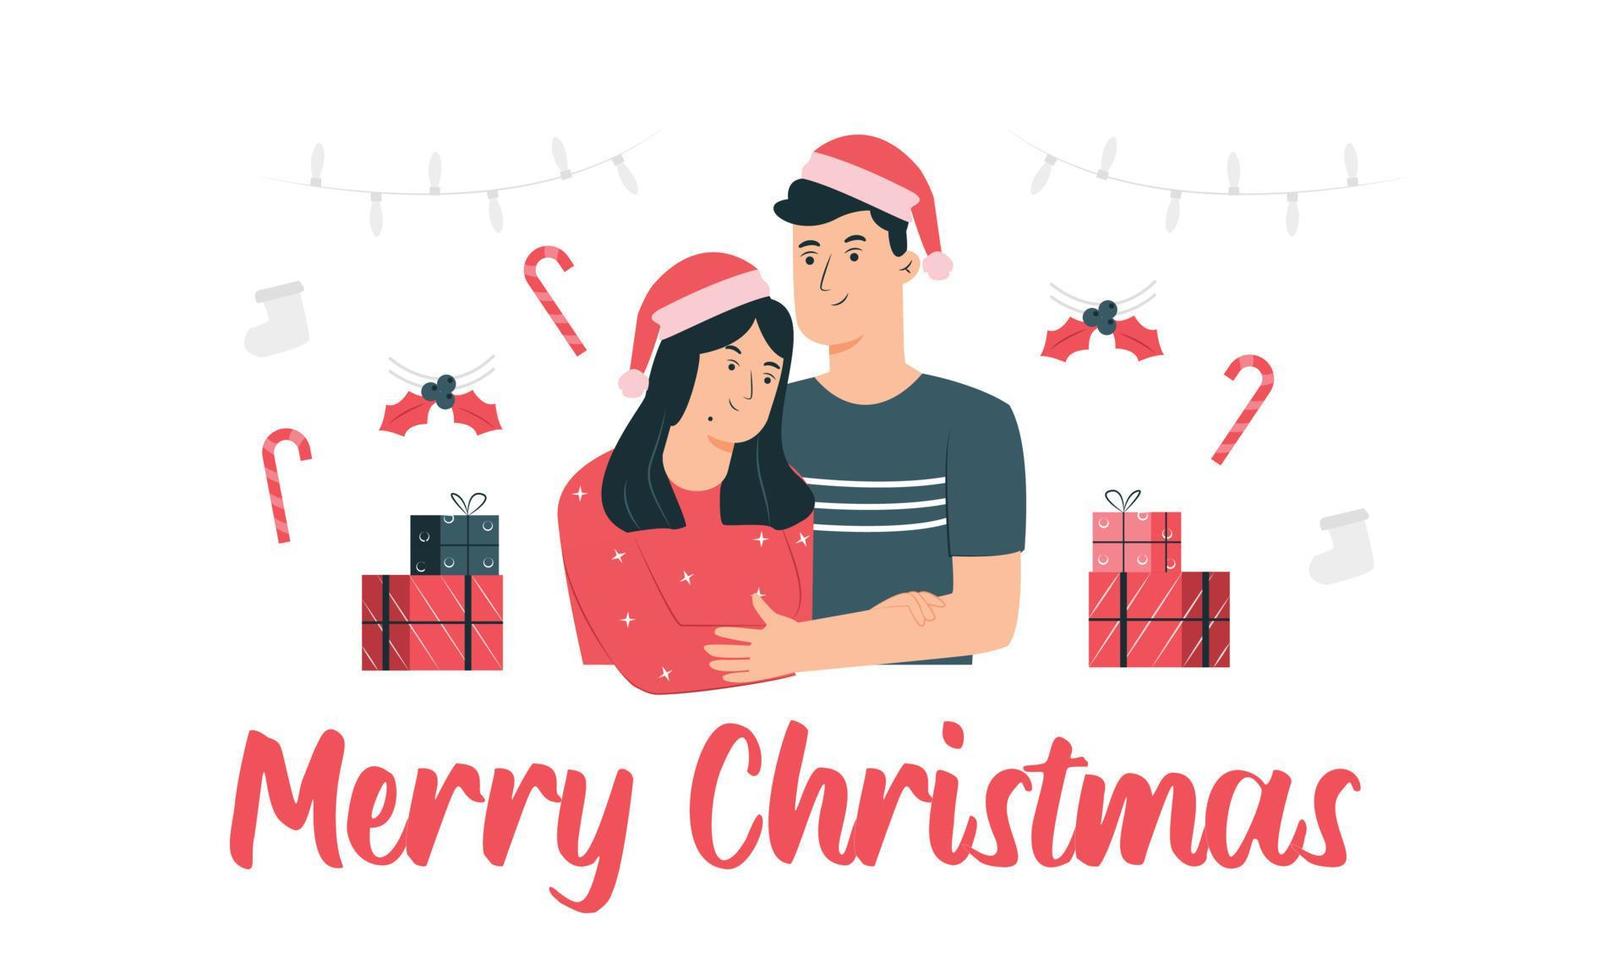 the family commemorates Christmas together. vector illustration